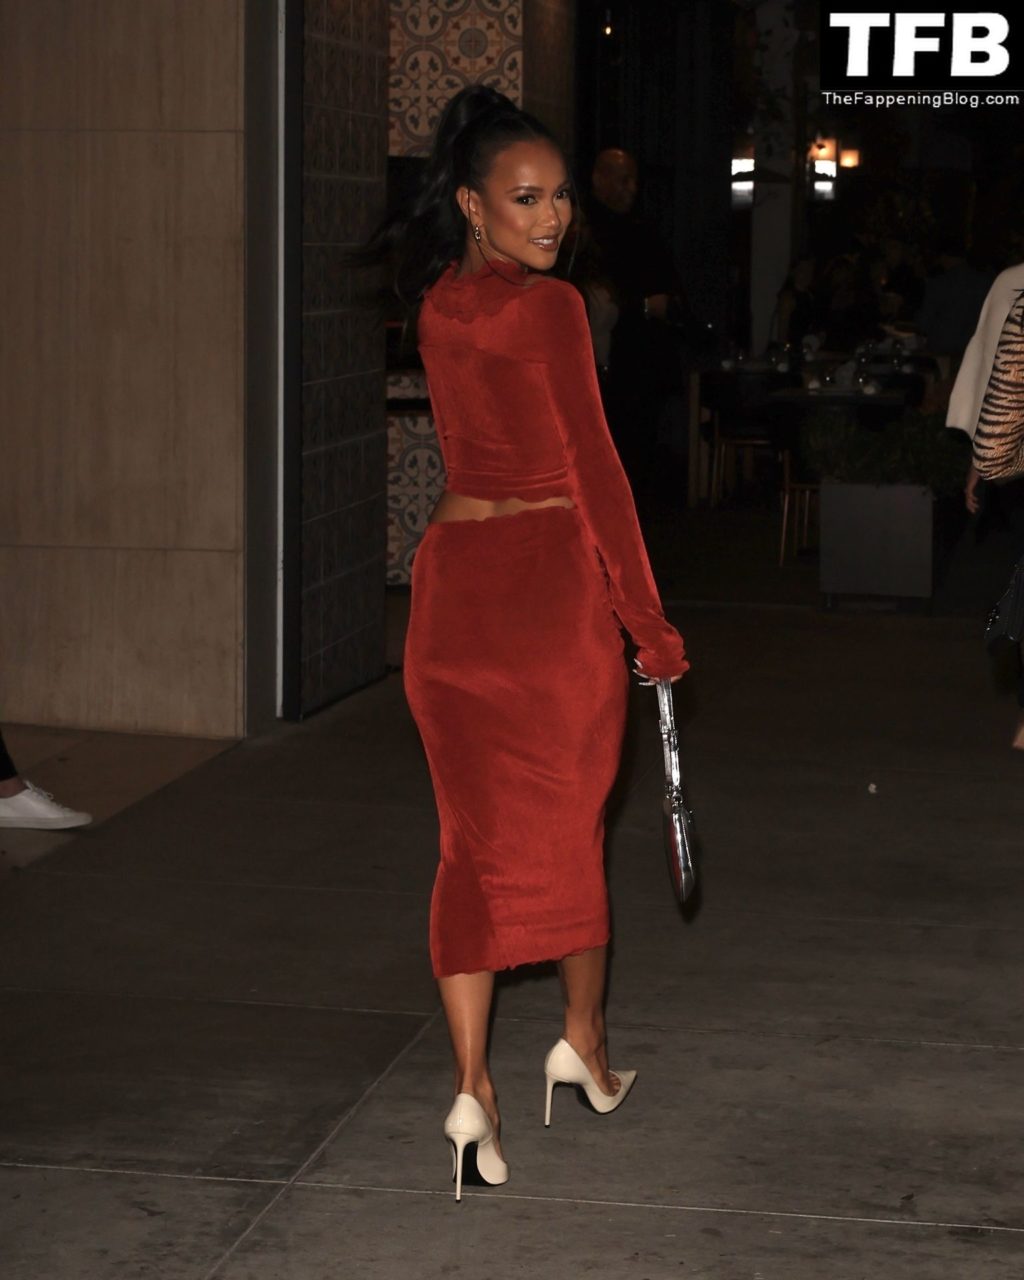 Karrueche Tran Sexy The Fappening Blog 22 1 1024x1280 - Karrueche Tran Shows Her Pokies in a Red Dress at The Hollywood Reporter’s Oscar Nominees Night (68 Photos)